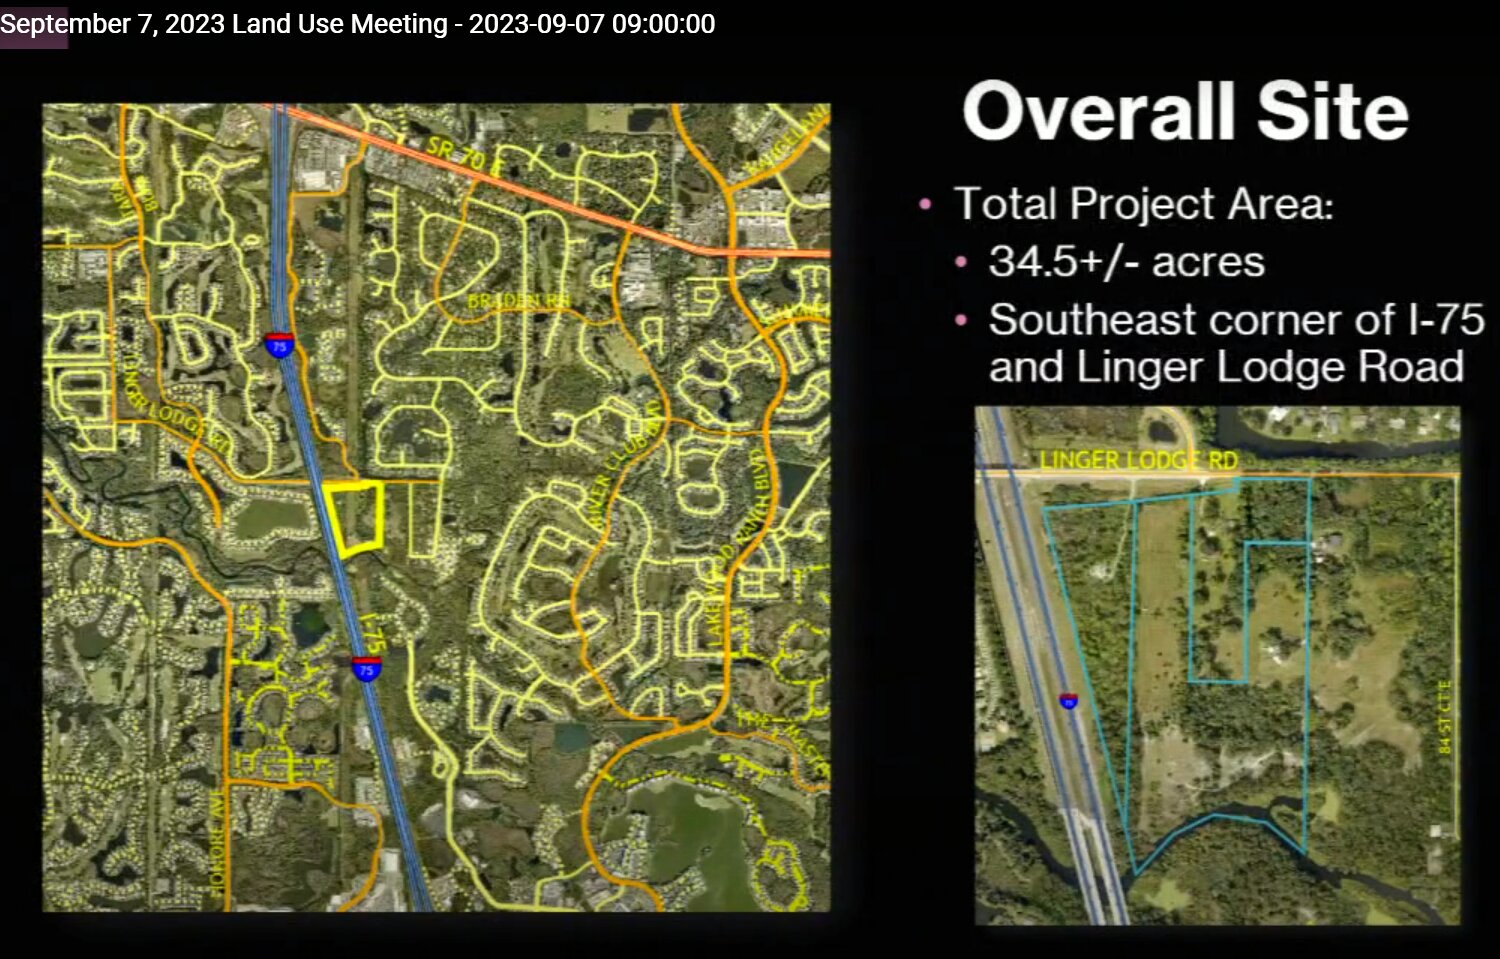 Linger Lodge Townhome development presentation slide shared with commissioners during a Sept. 7, 2023 land use meeting.